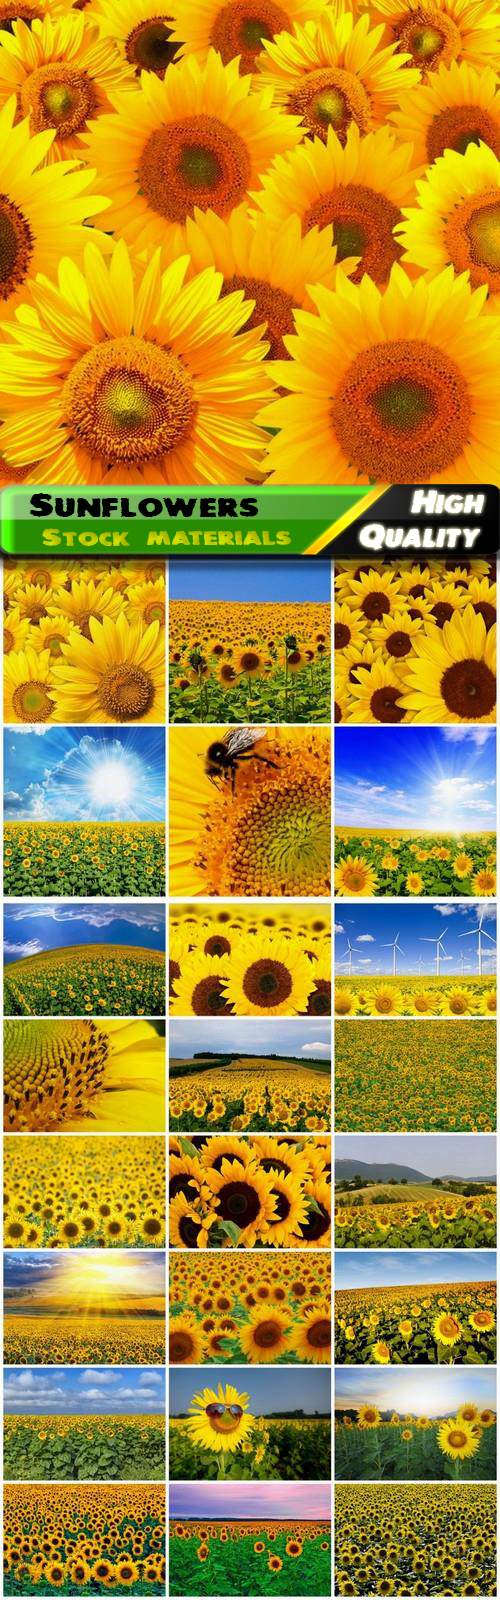 Summer nature landscape and field with sunflowers - 25 HQ Jpg